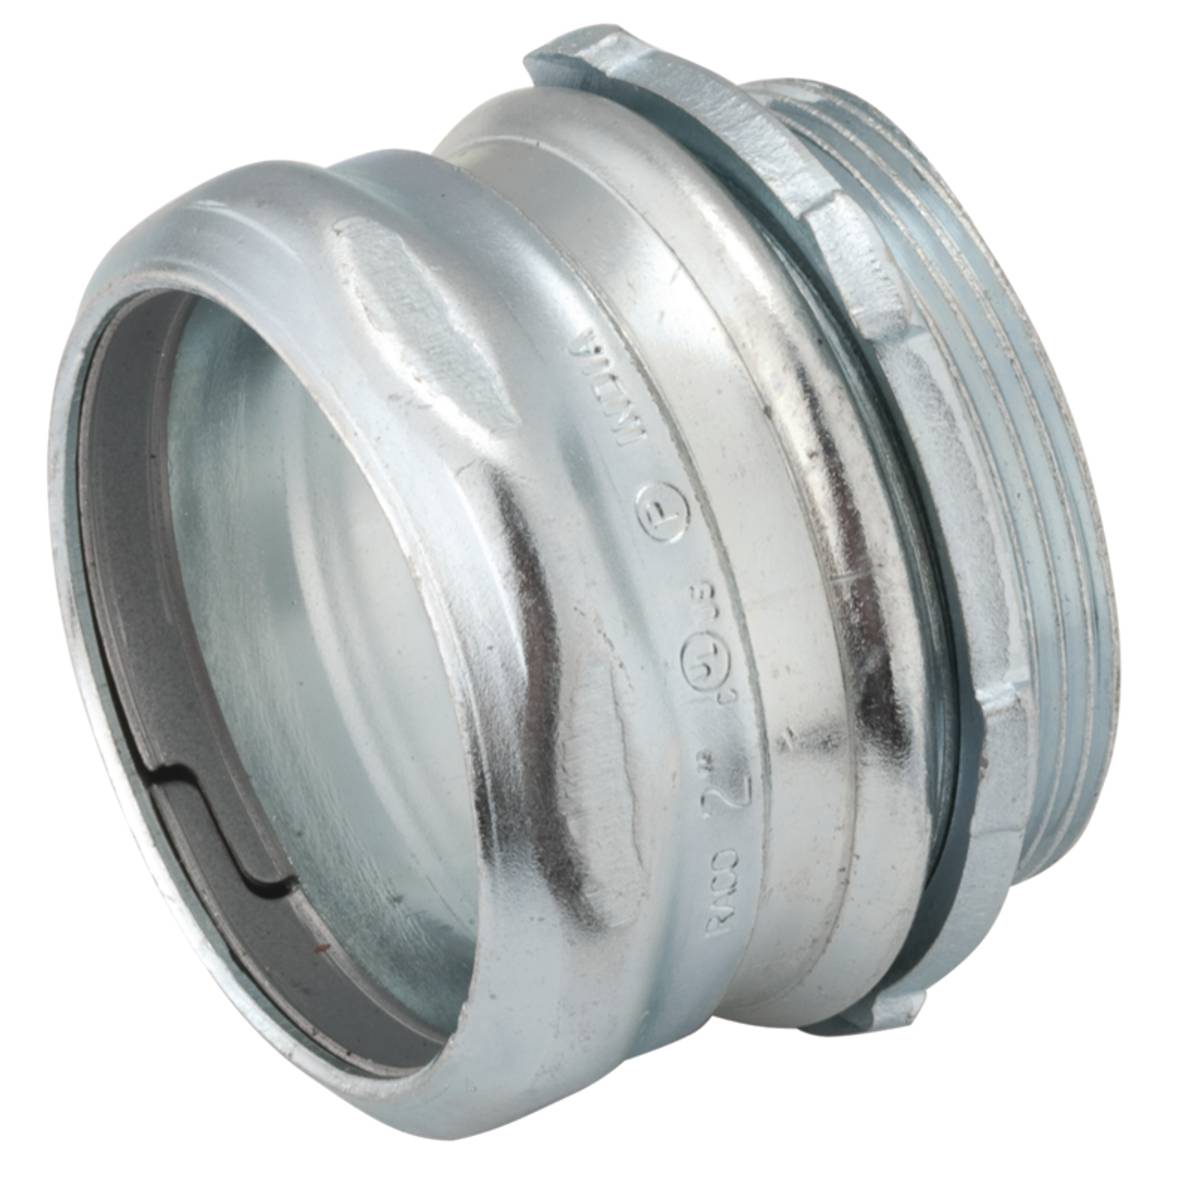 RACO® 2940 Non-Insulated Compression Connector, 2-1/2 in Trade, For Use With EMT Conduit, Steel, Electro-Plated Zinc